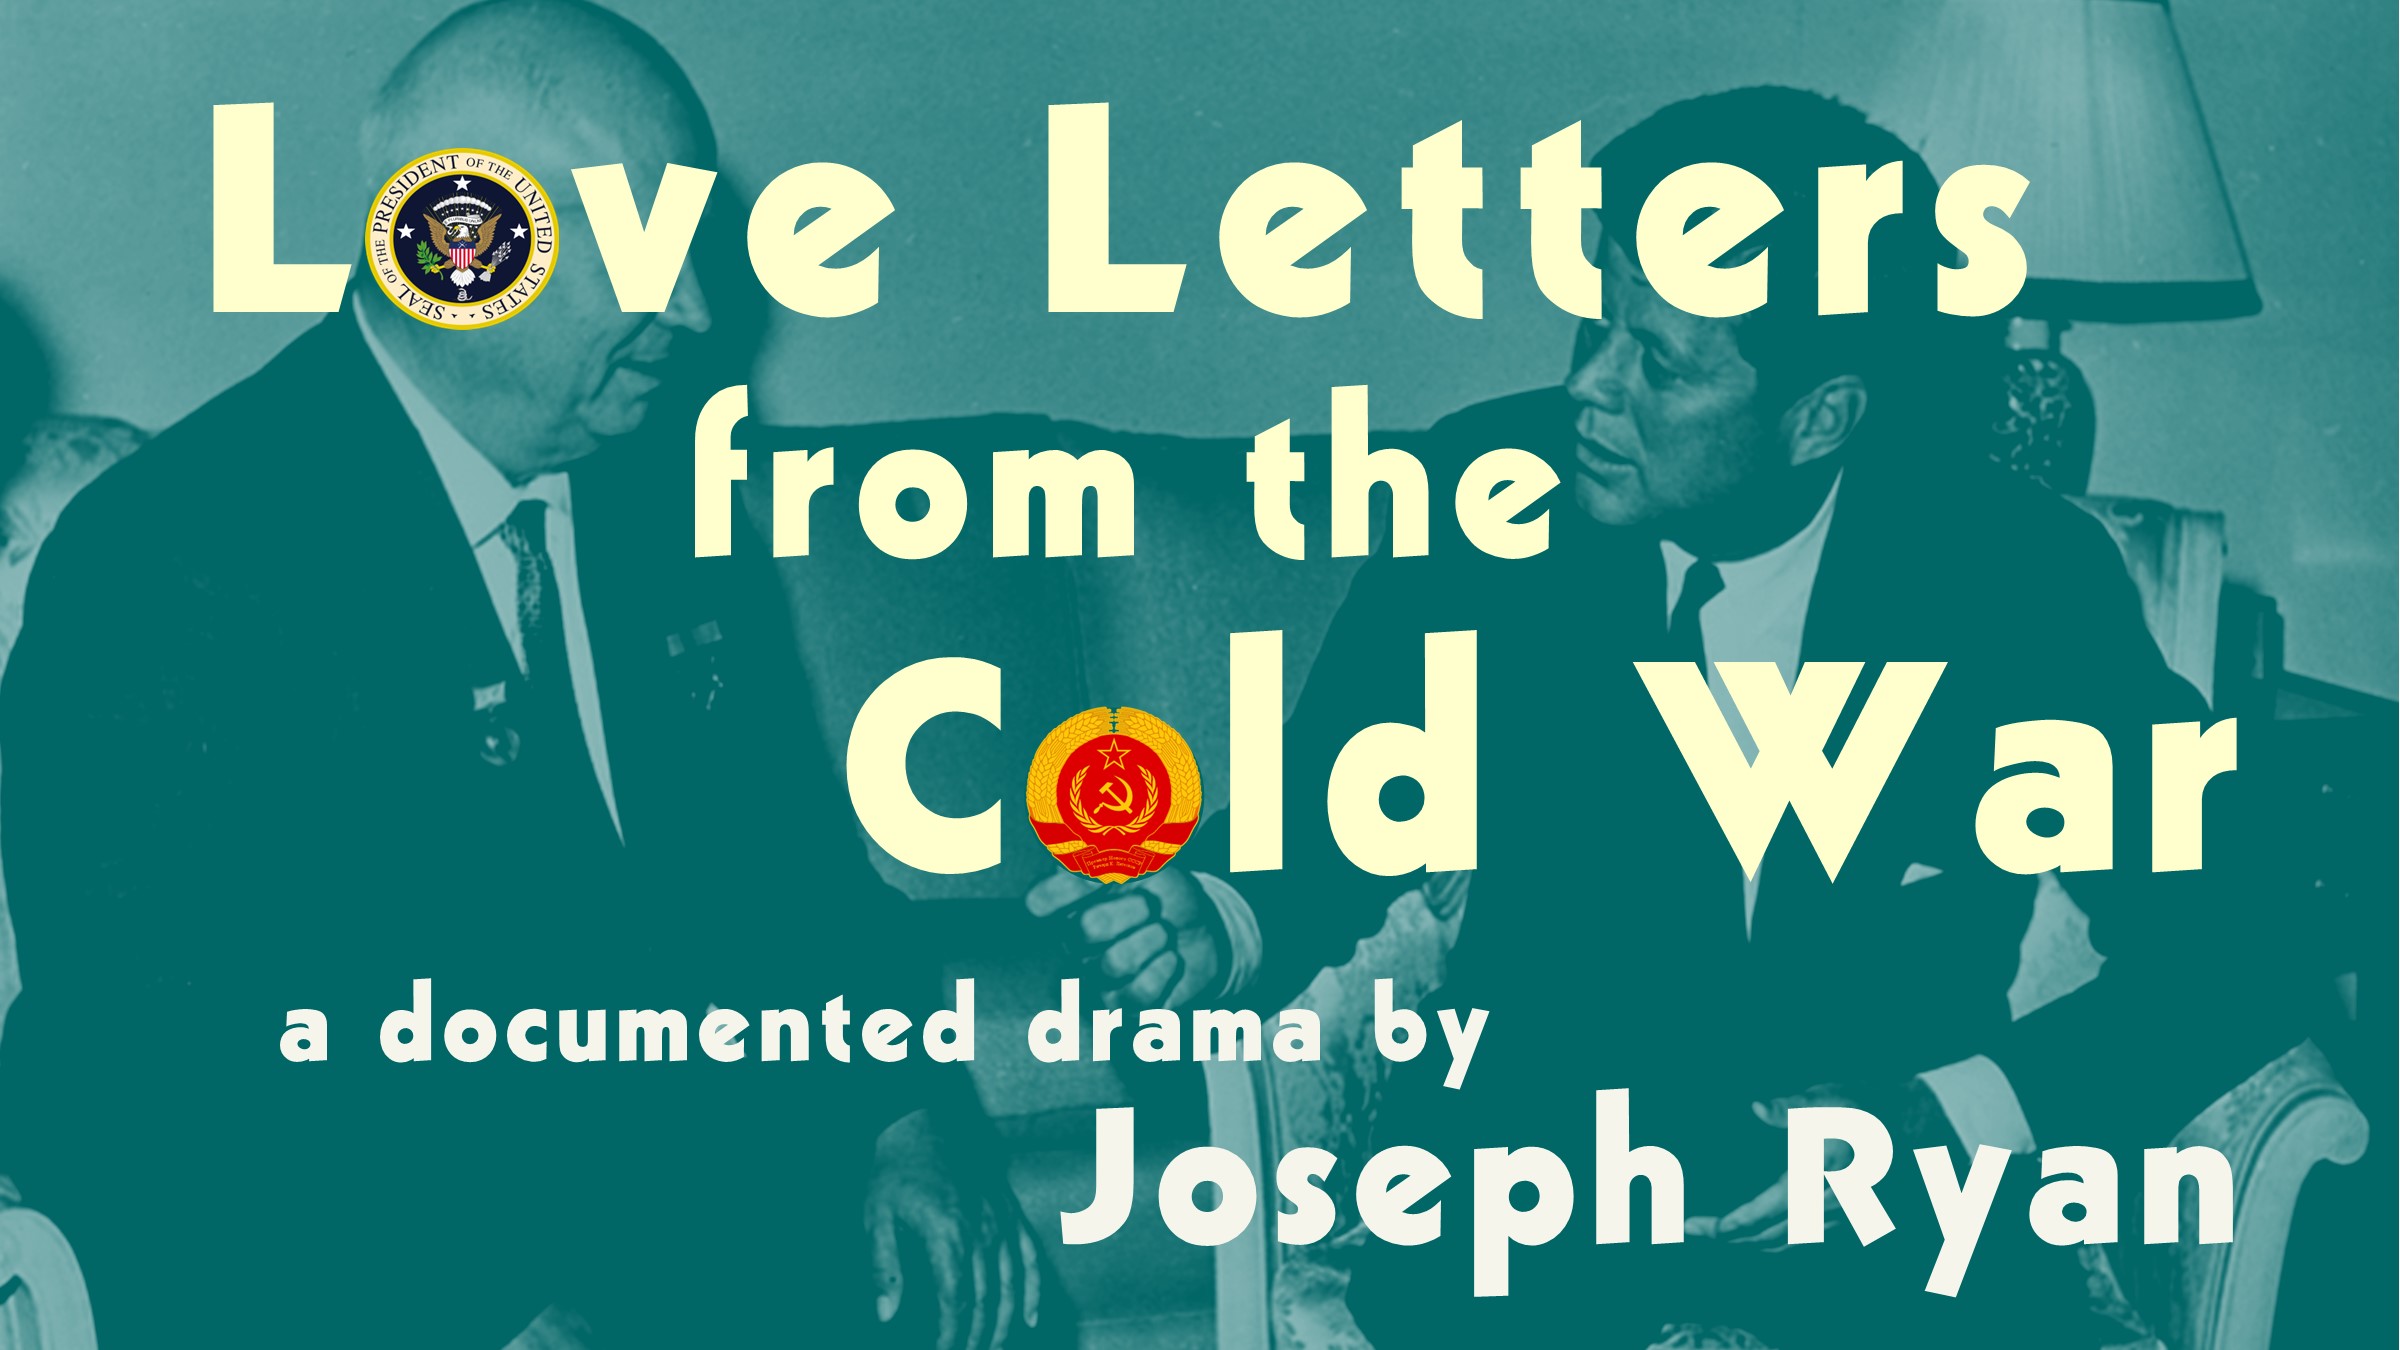 Khrushchev and Kennedy in green with title: Love
                  Letter from the Cold War